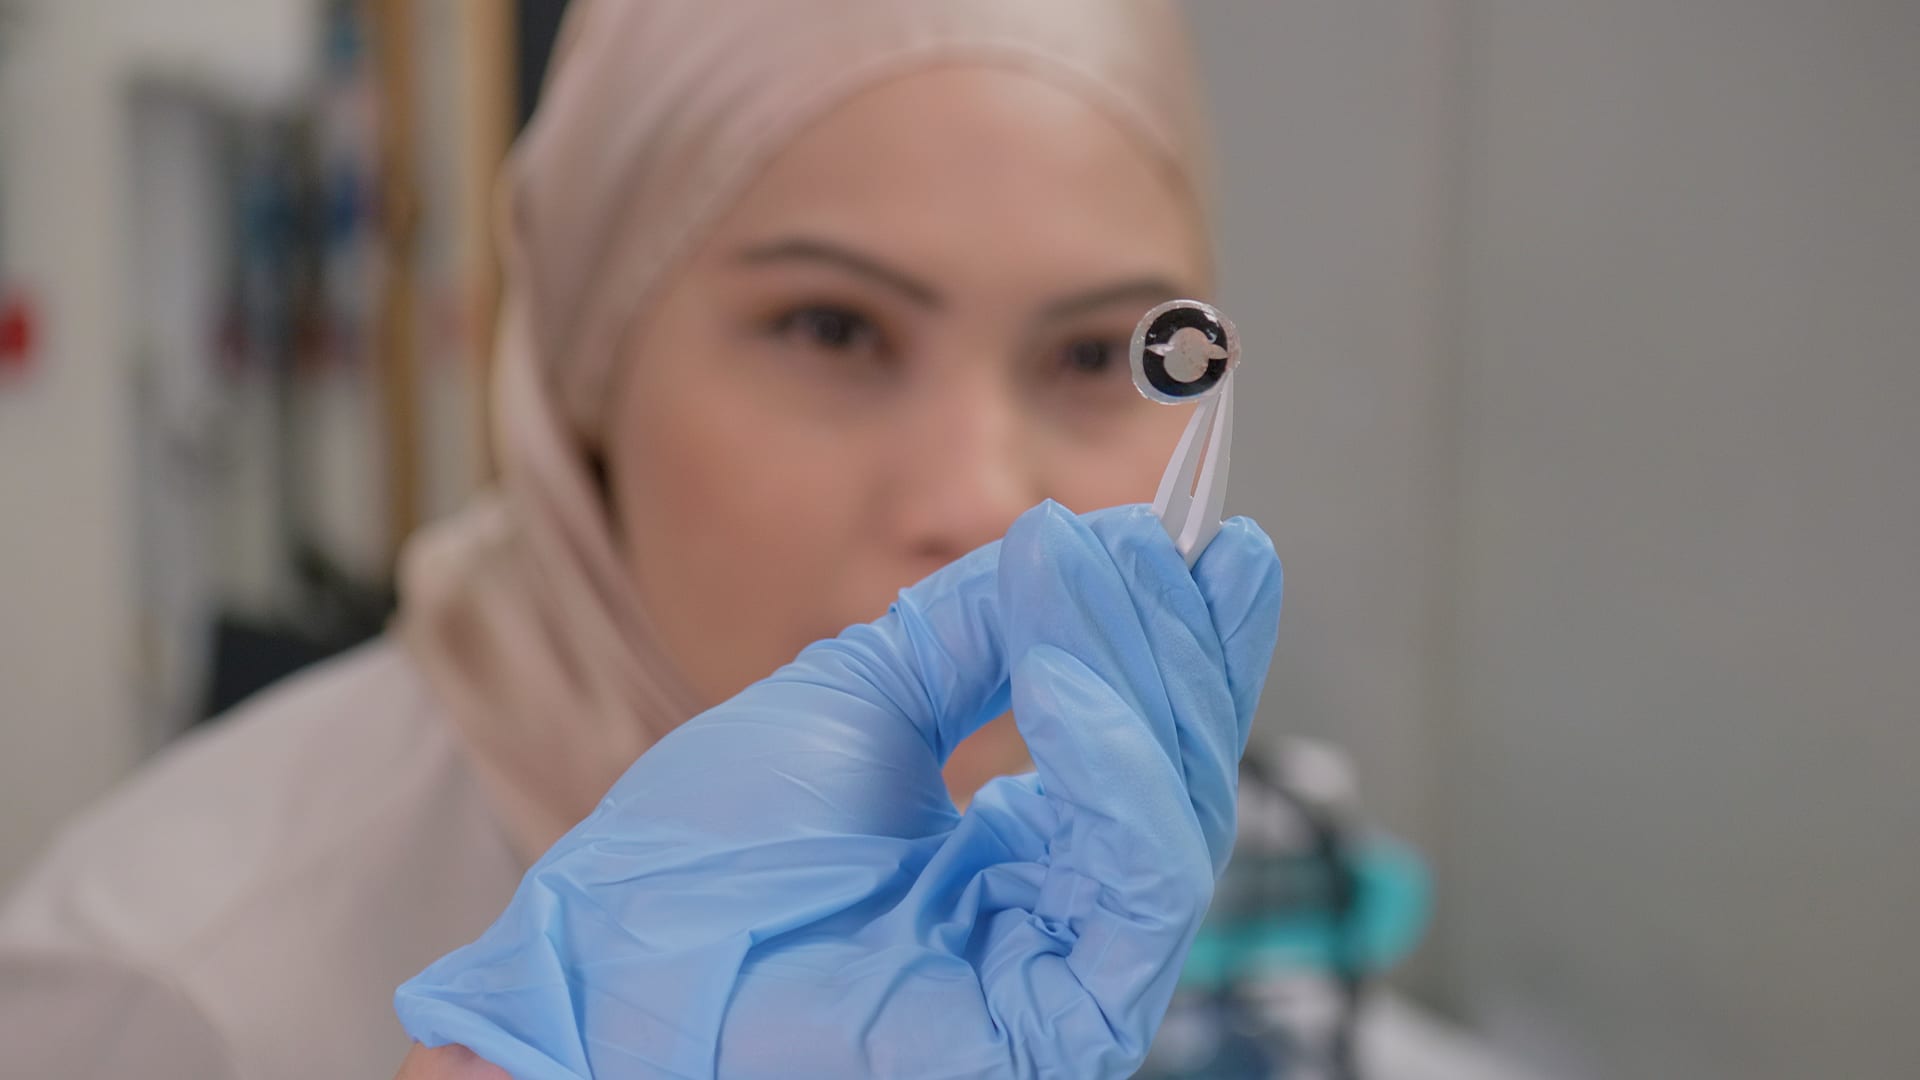 The super-thin battery that could power smart contact lenses